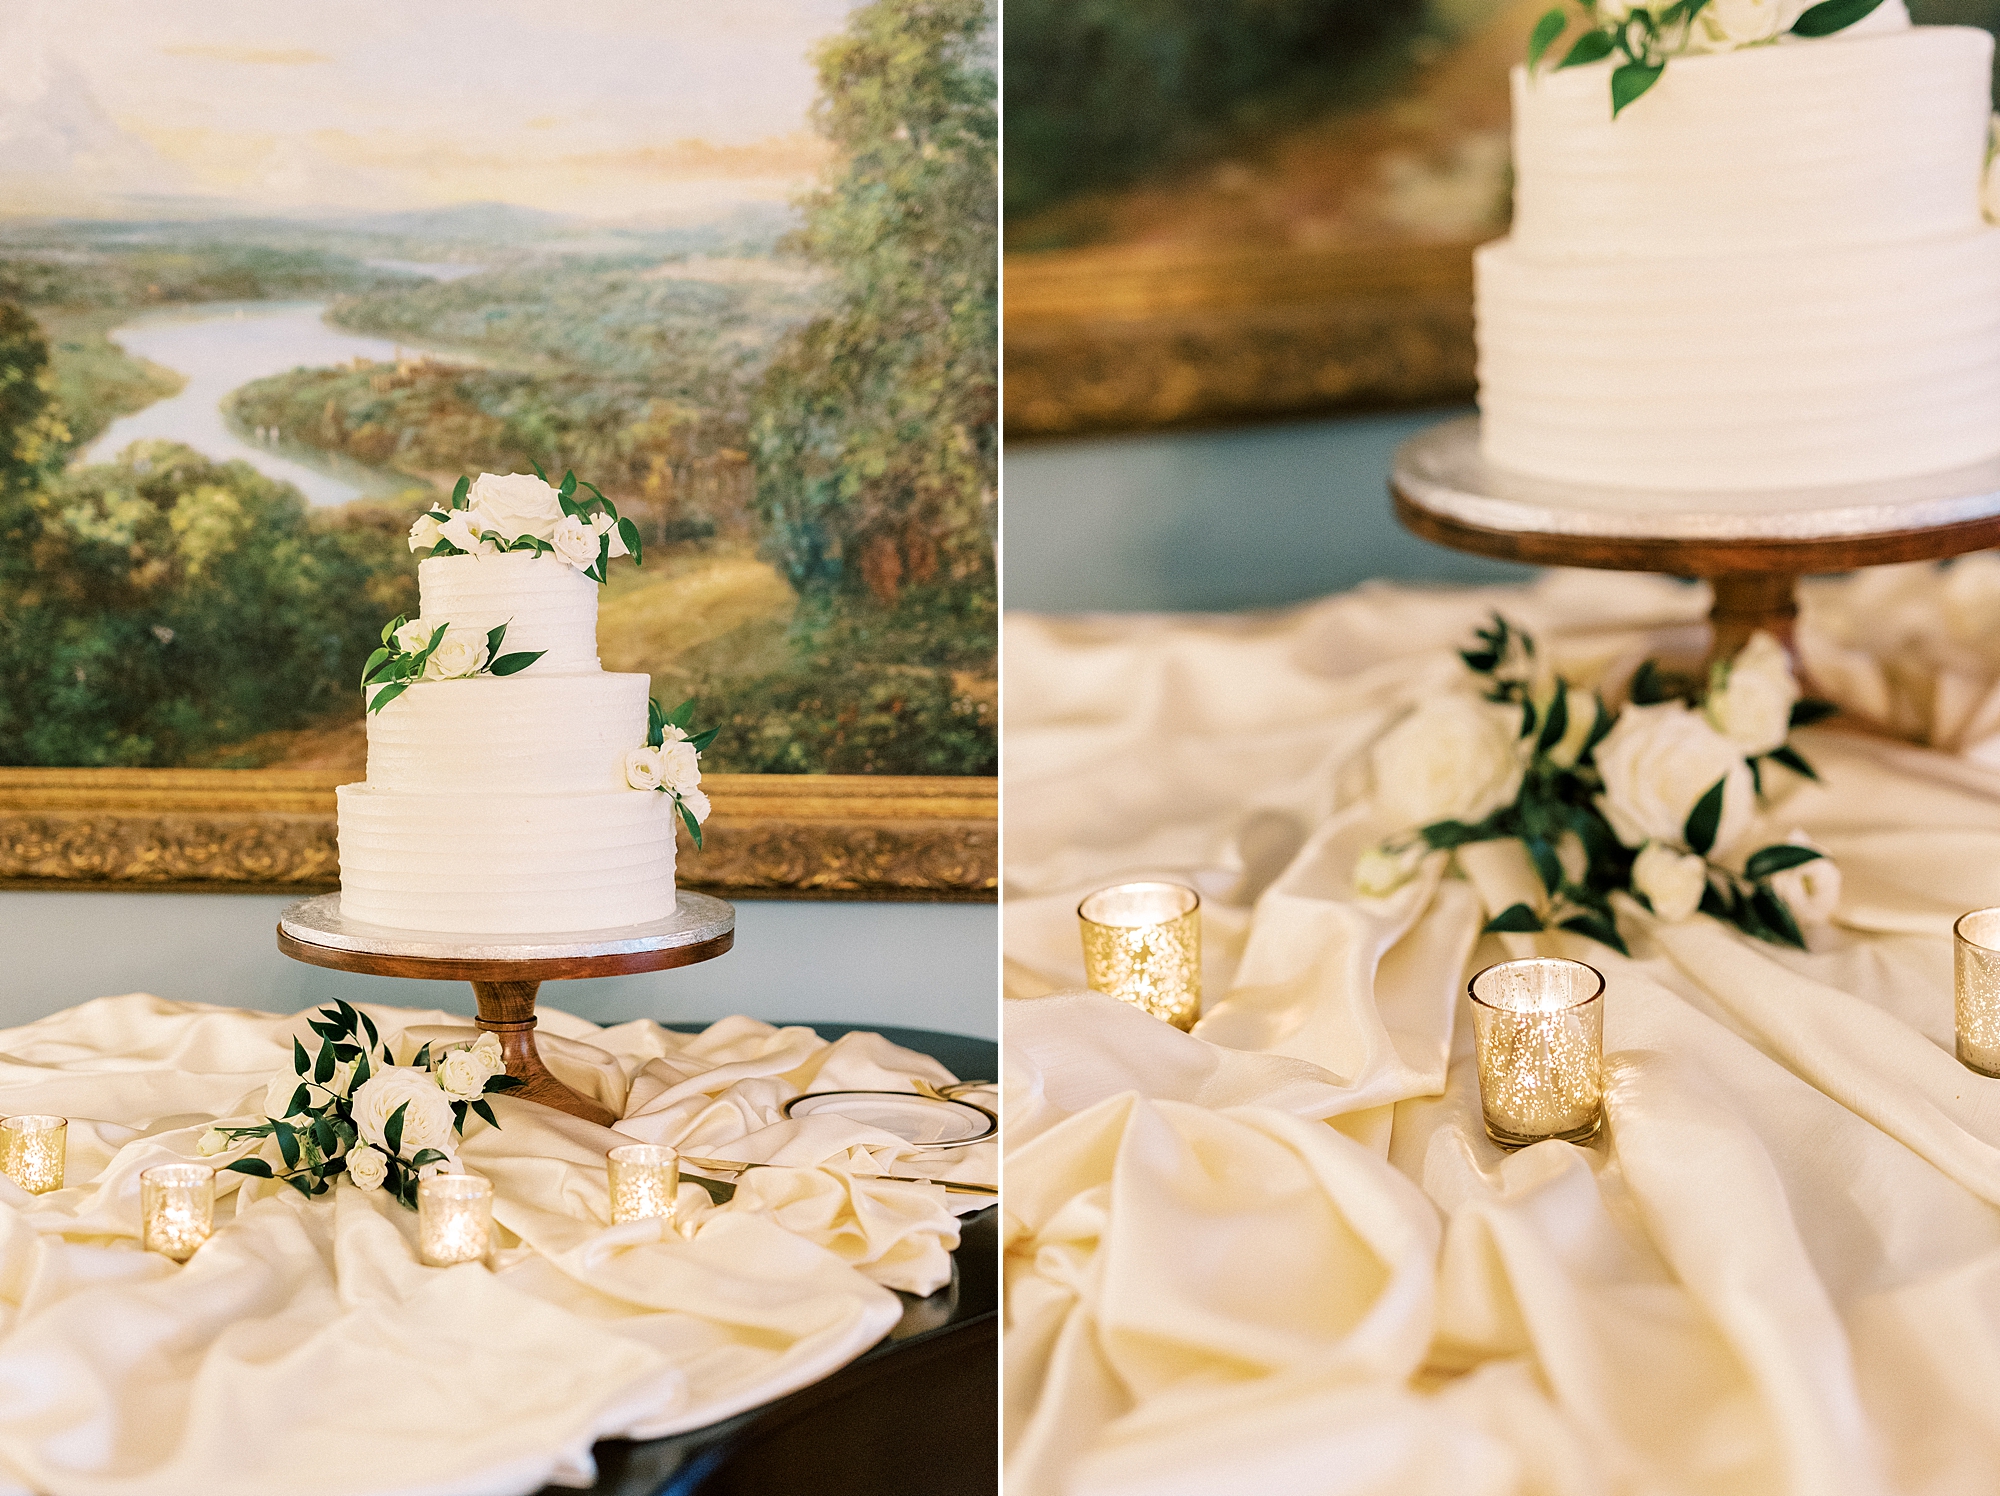 tiered wedding cake with greenery on table with fabric and gold candles 